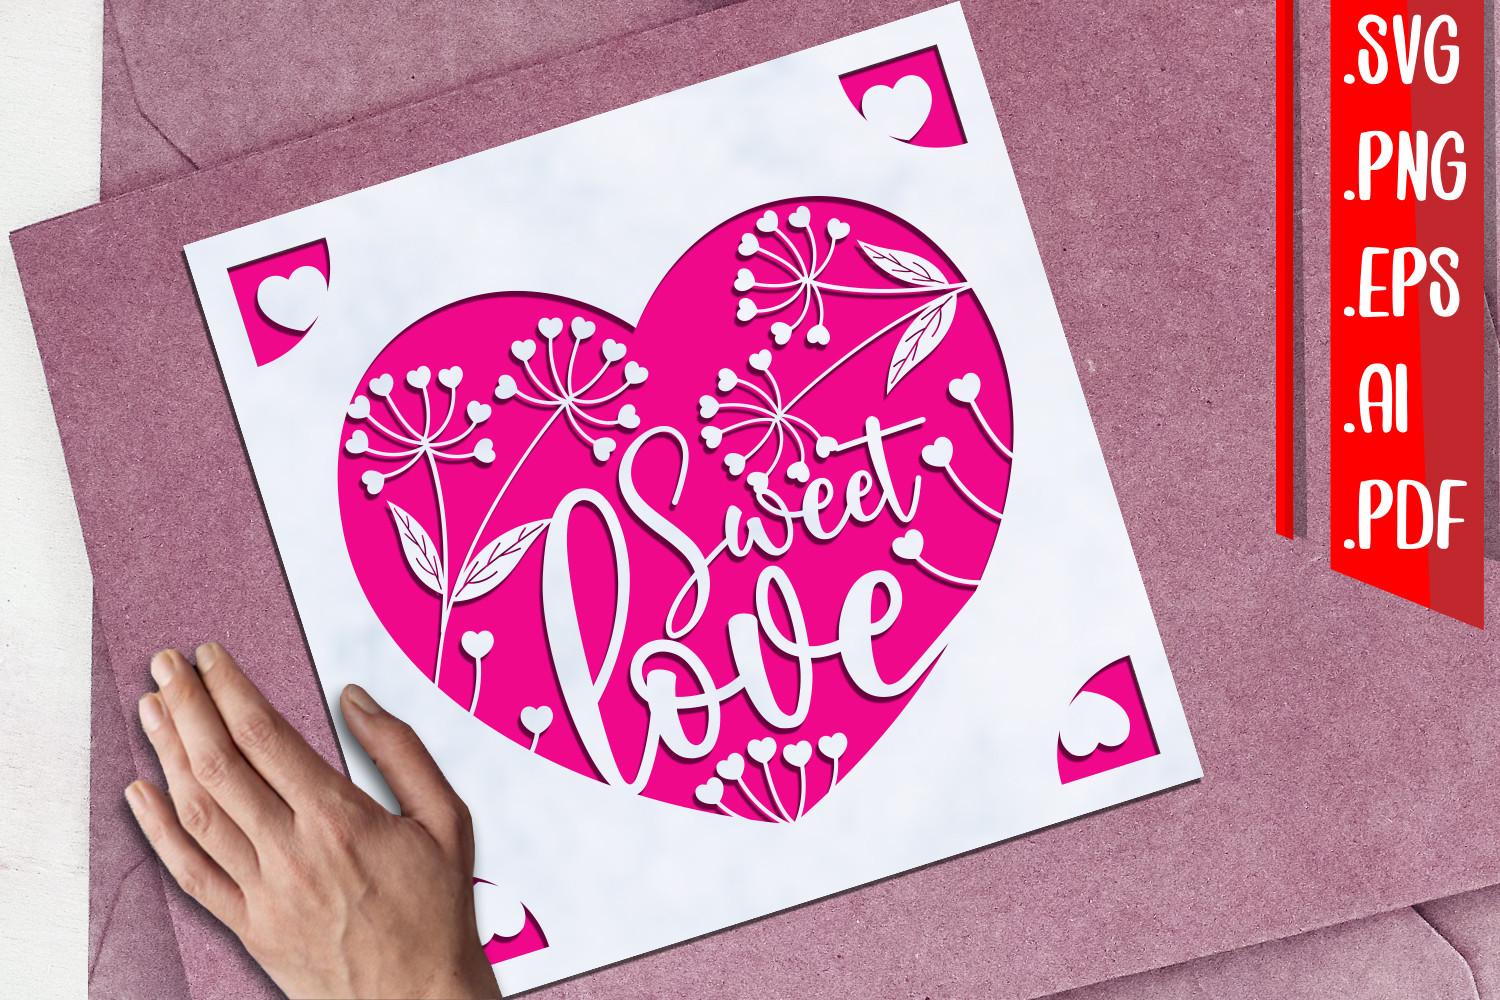 Sweet Love Greeting Cards Svg Eps Png Ai